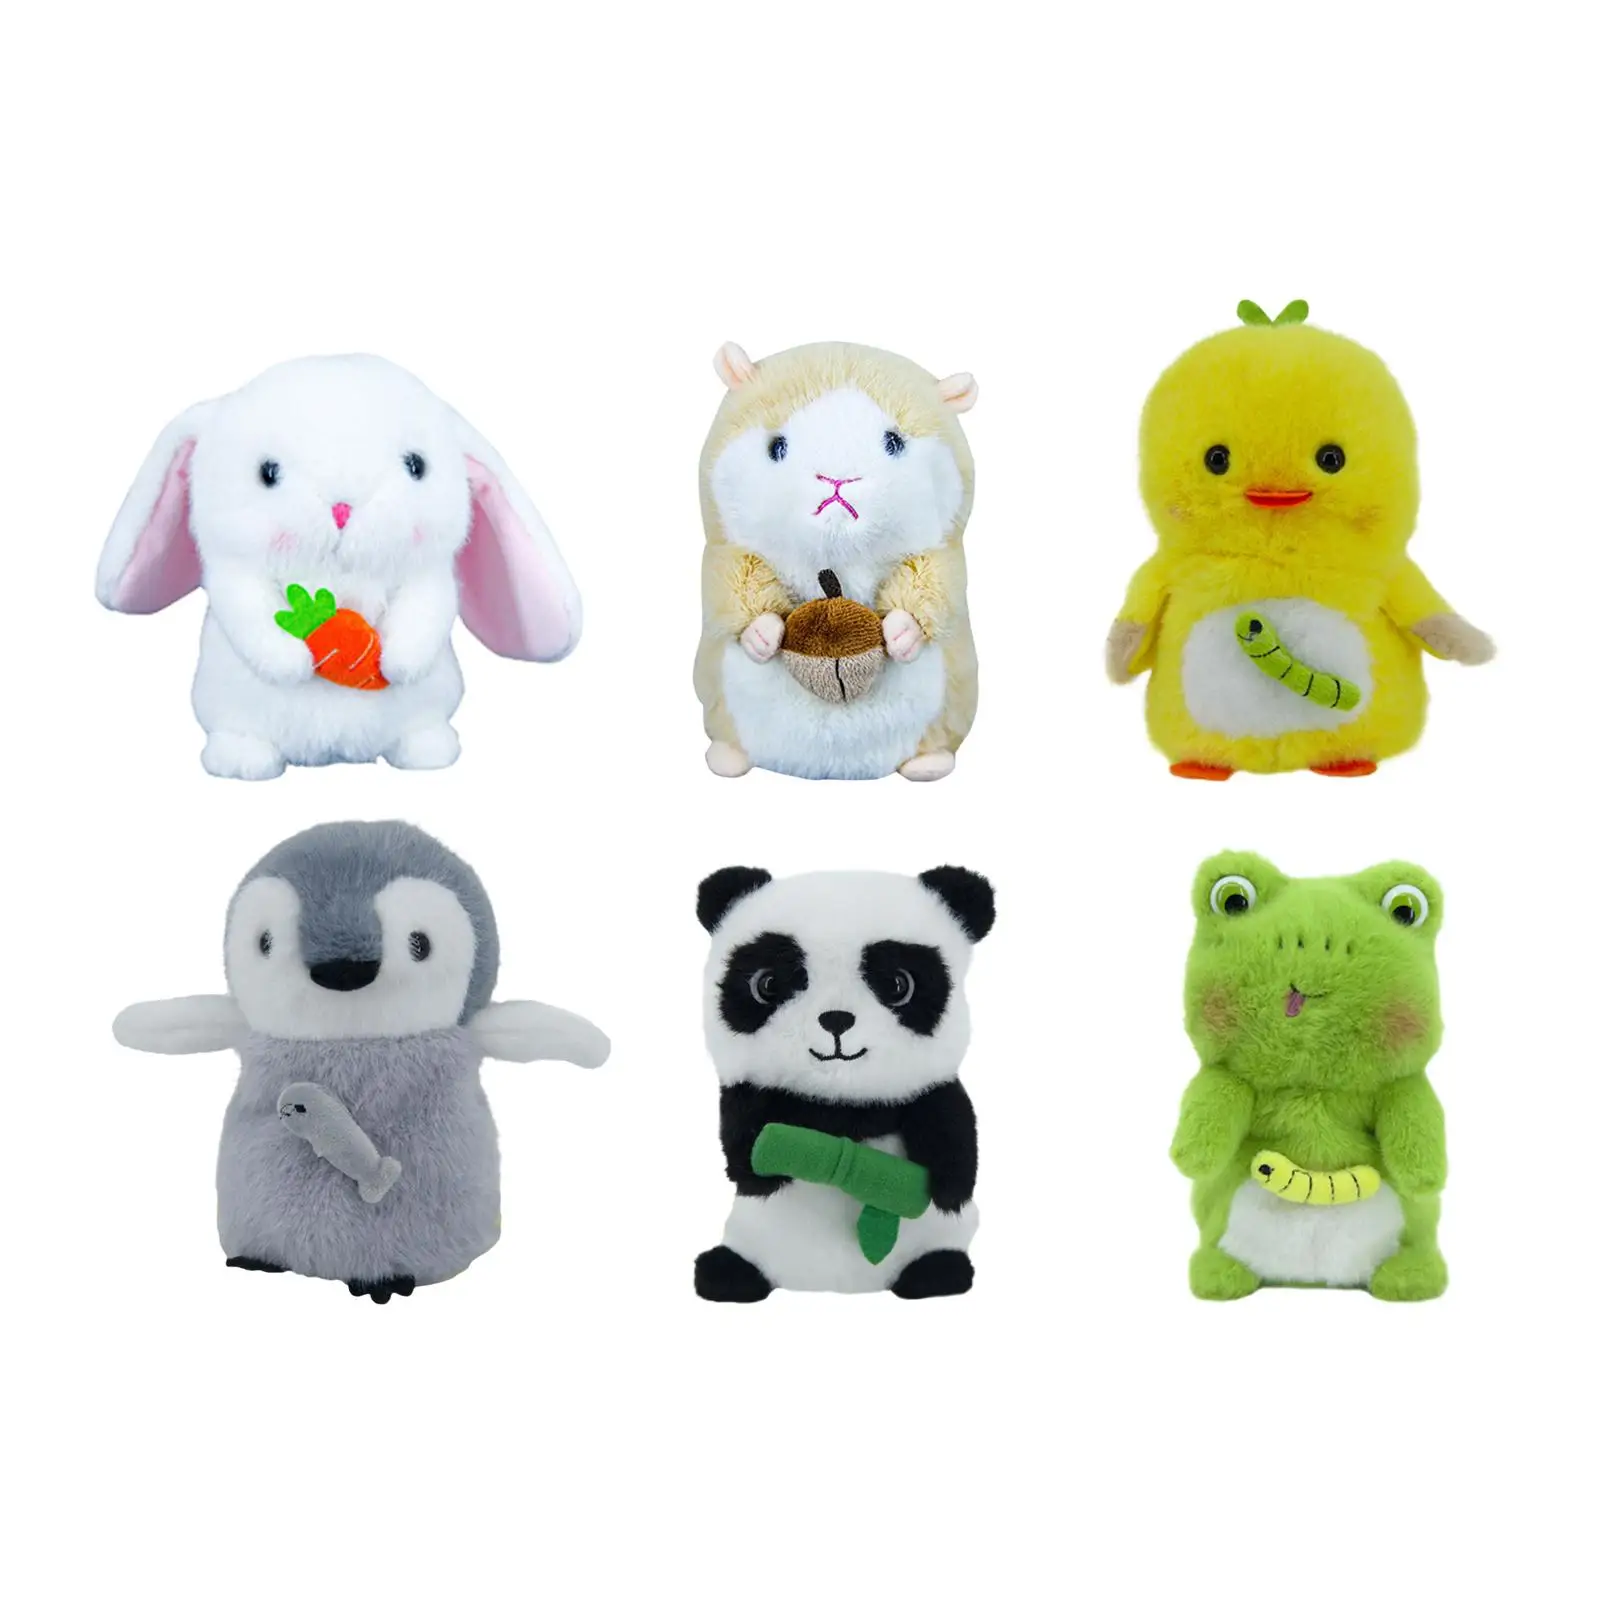 Kids Talking Animal Plush Toy for Baby Toddler ,Build Early Leaning Skills